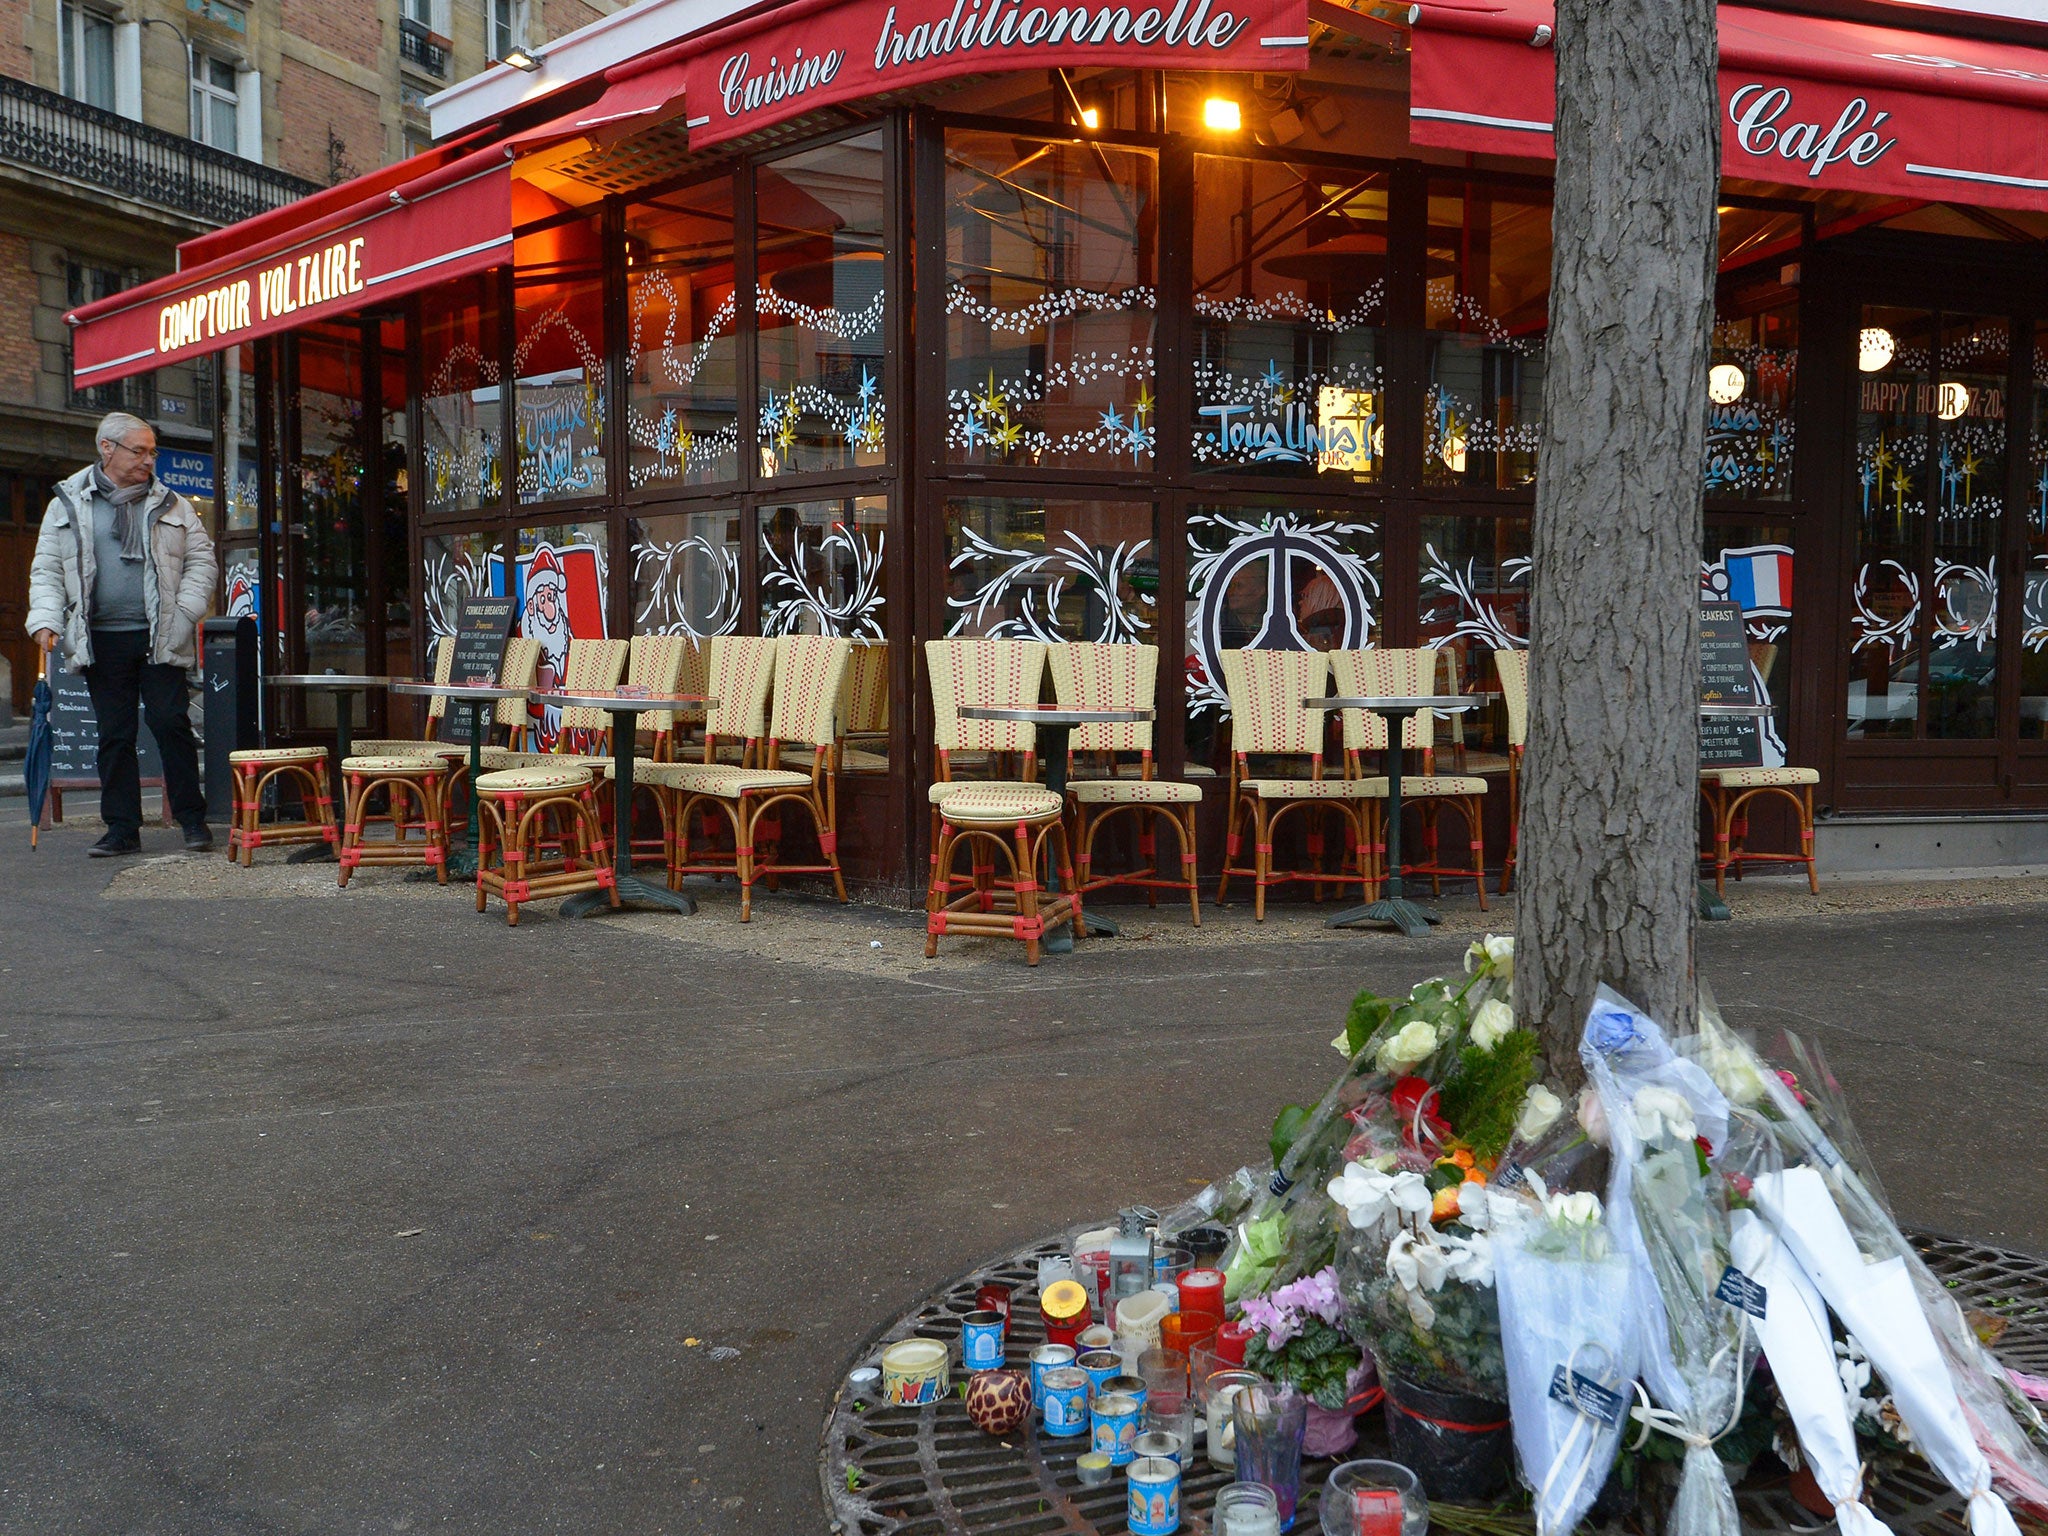 The Comptoir Voltaire, in the 11th arrondissement, one of the sites of the 13 November attacks